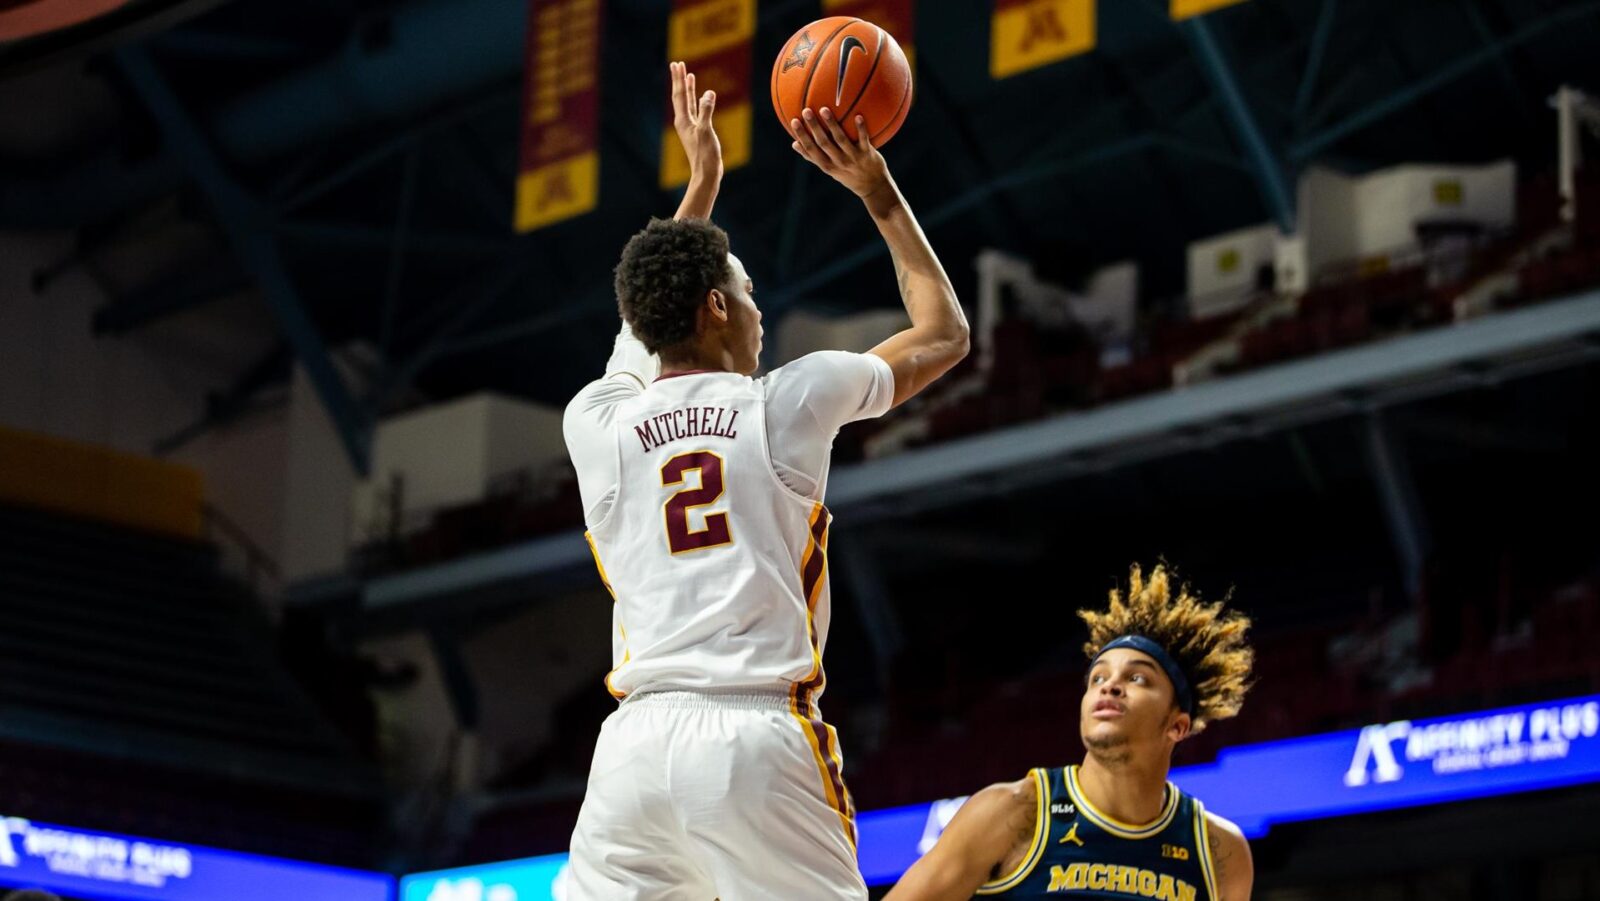 Martice Mitchell Latest Gopher MBB Player to Enter Transfer Portal